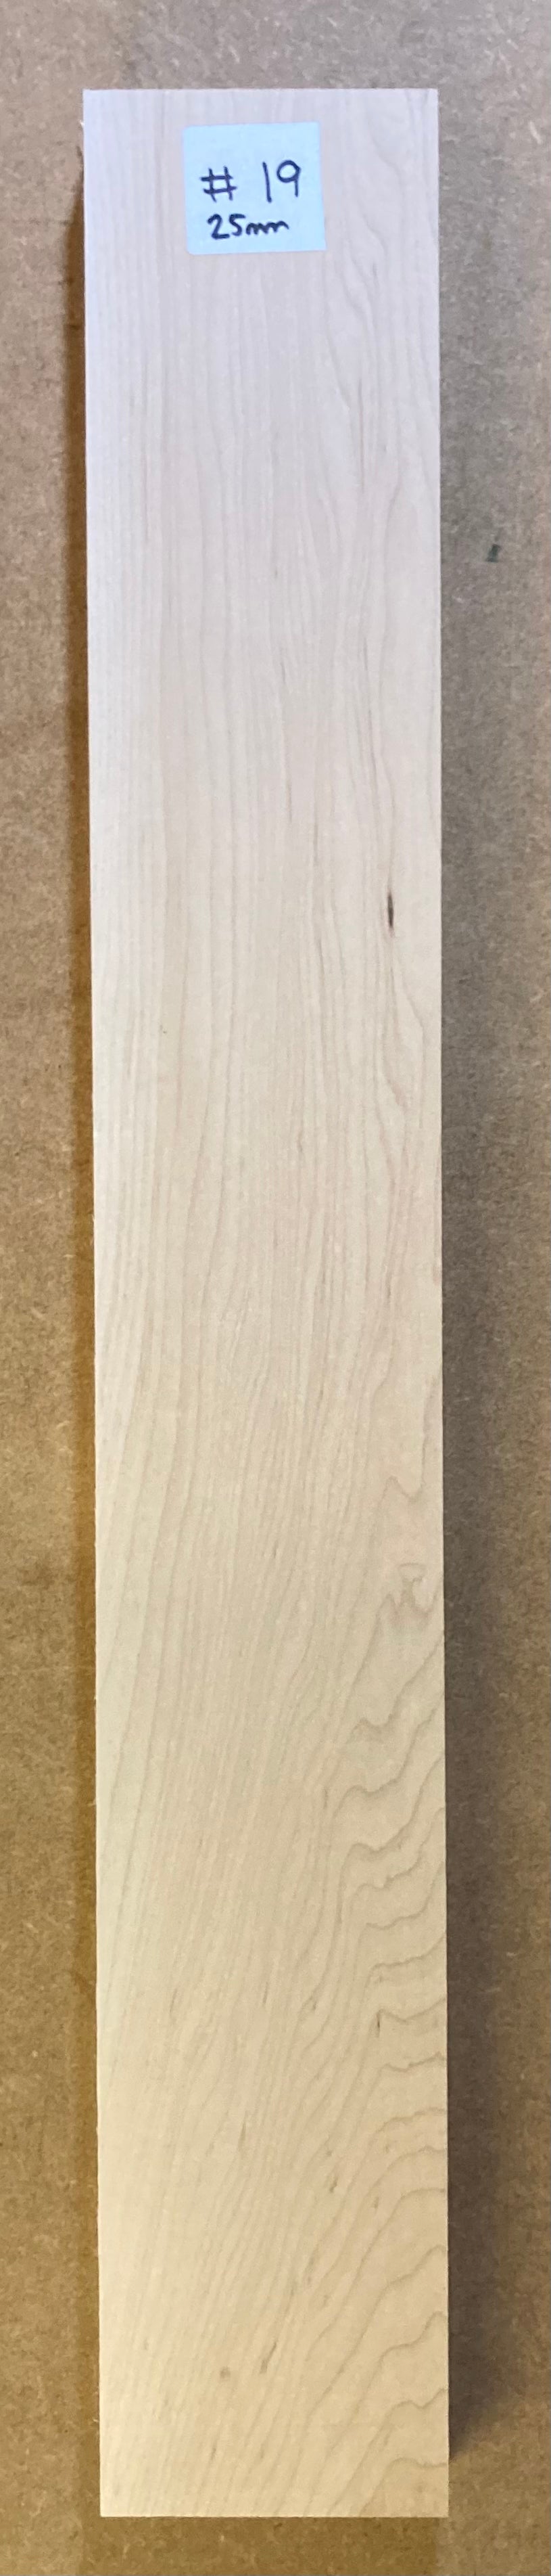 Electric Neck Blank - Maple #19